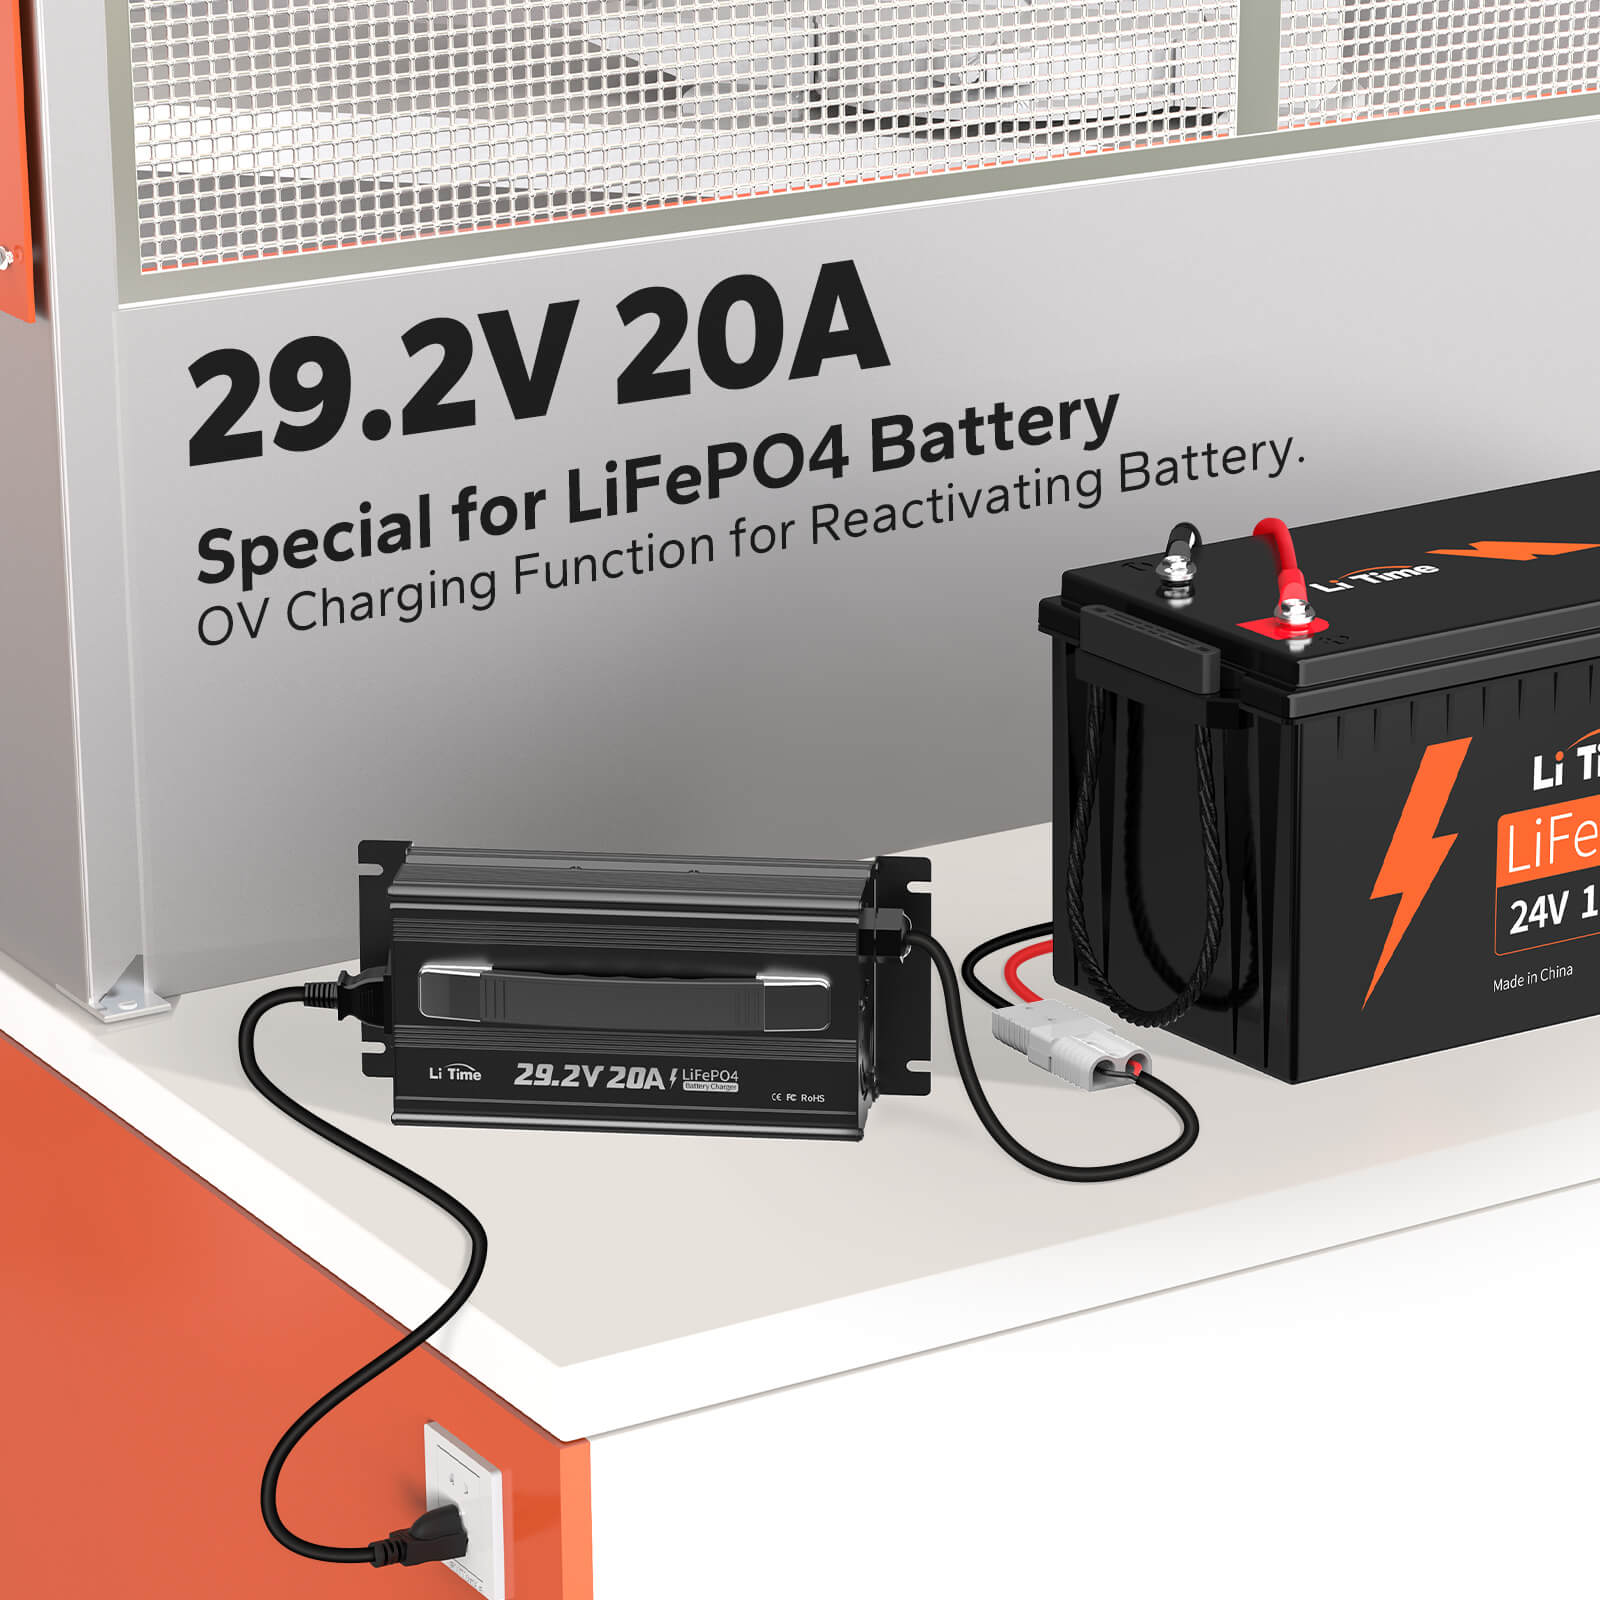 LiTime 29.2V 20A lithium battery charger for 24V LiFePO4 lithium battery